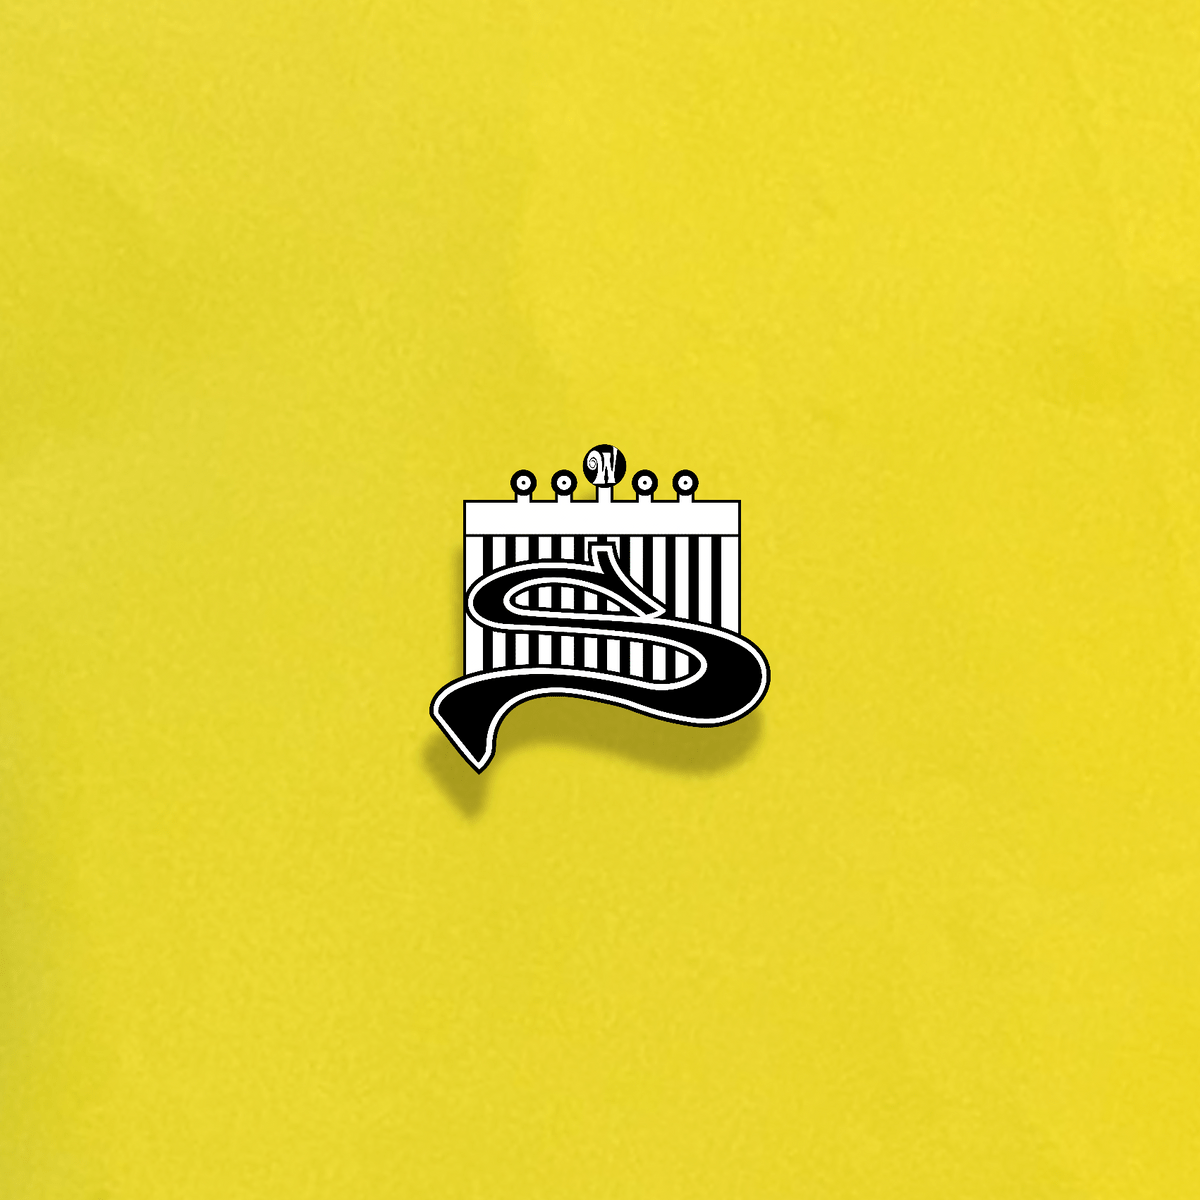 A yellow and black enamel pin with a wave design - Hufflepuff